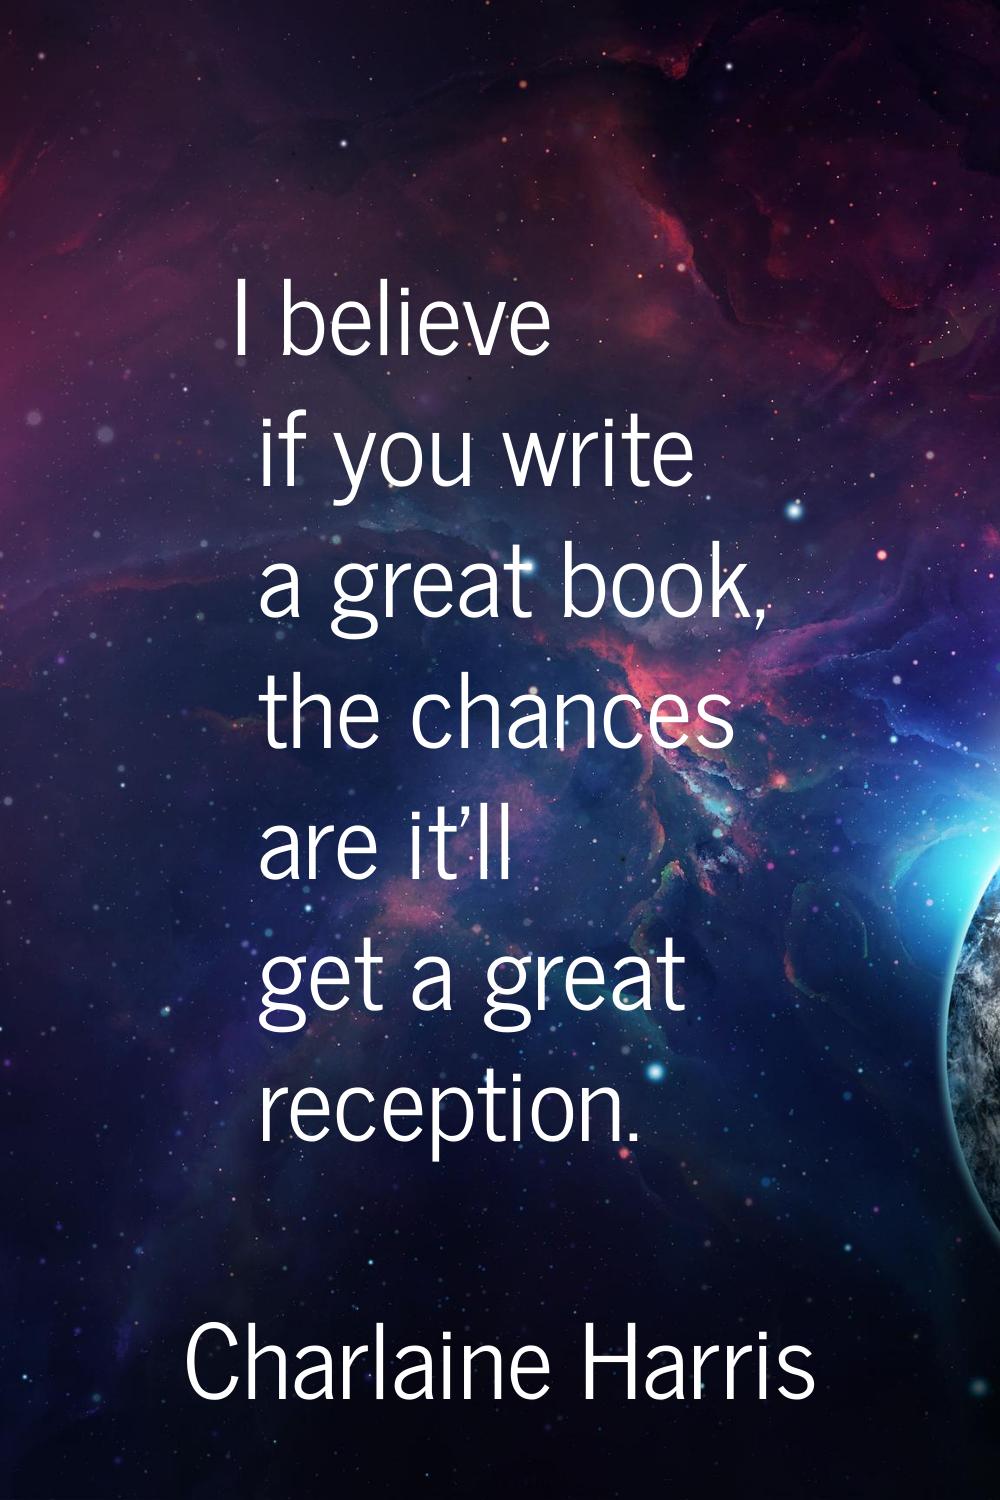 I believe if you write a great book, the chances are it'll get a great reception.